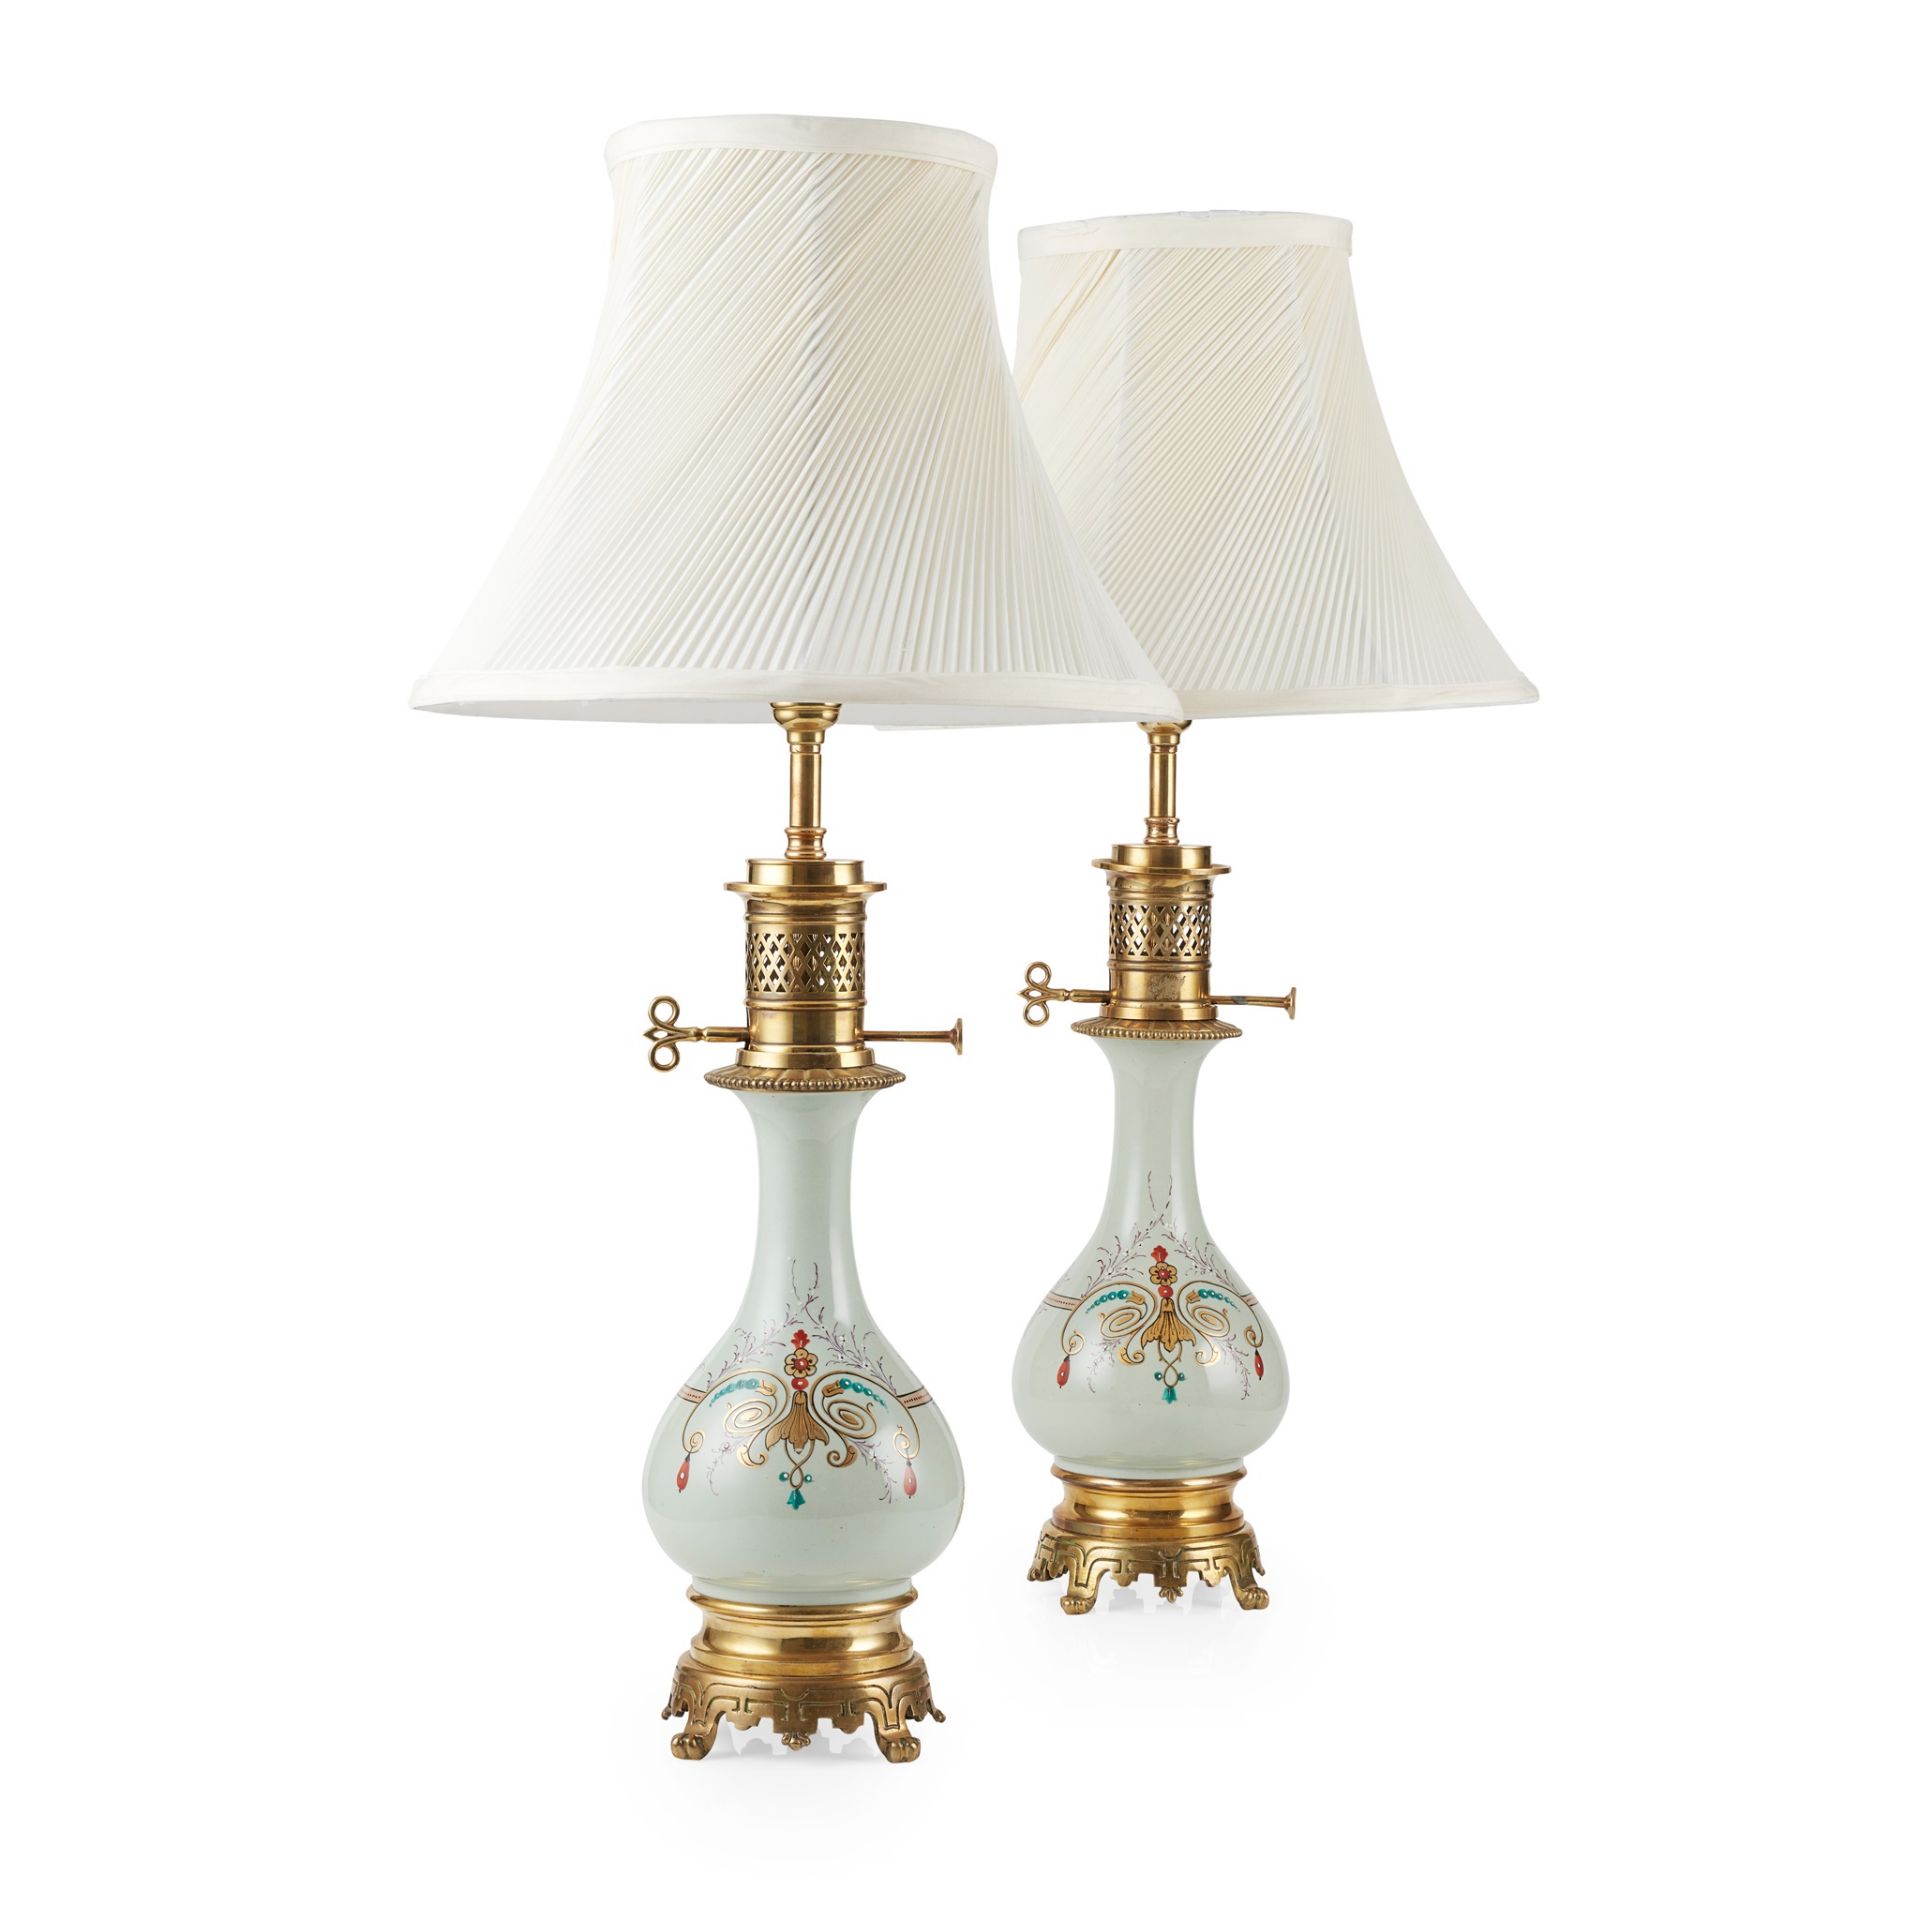 PAIR OF CELADON GLAZED AND GILT METAL LAMPS 19TH CENTURY